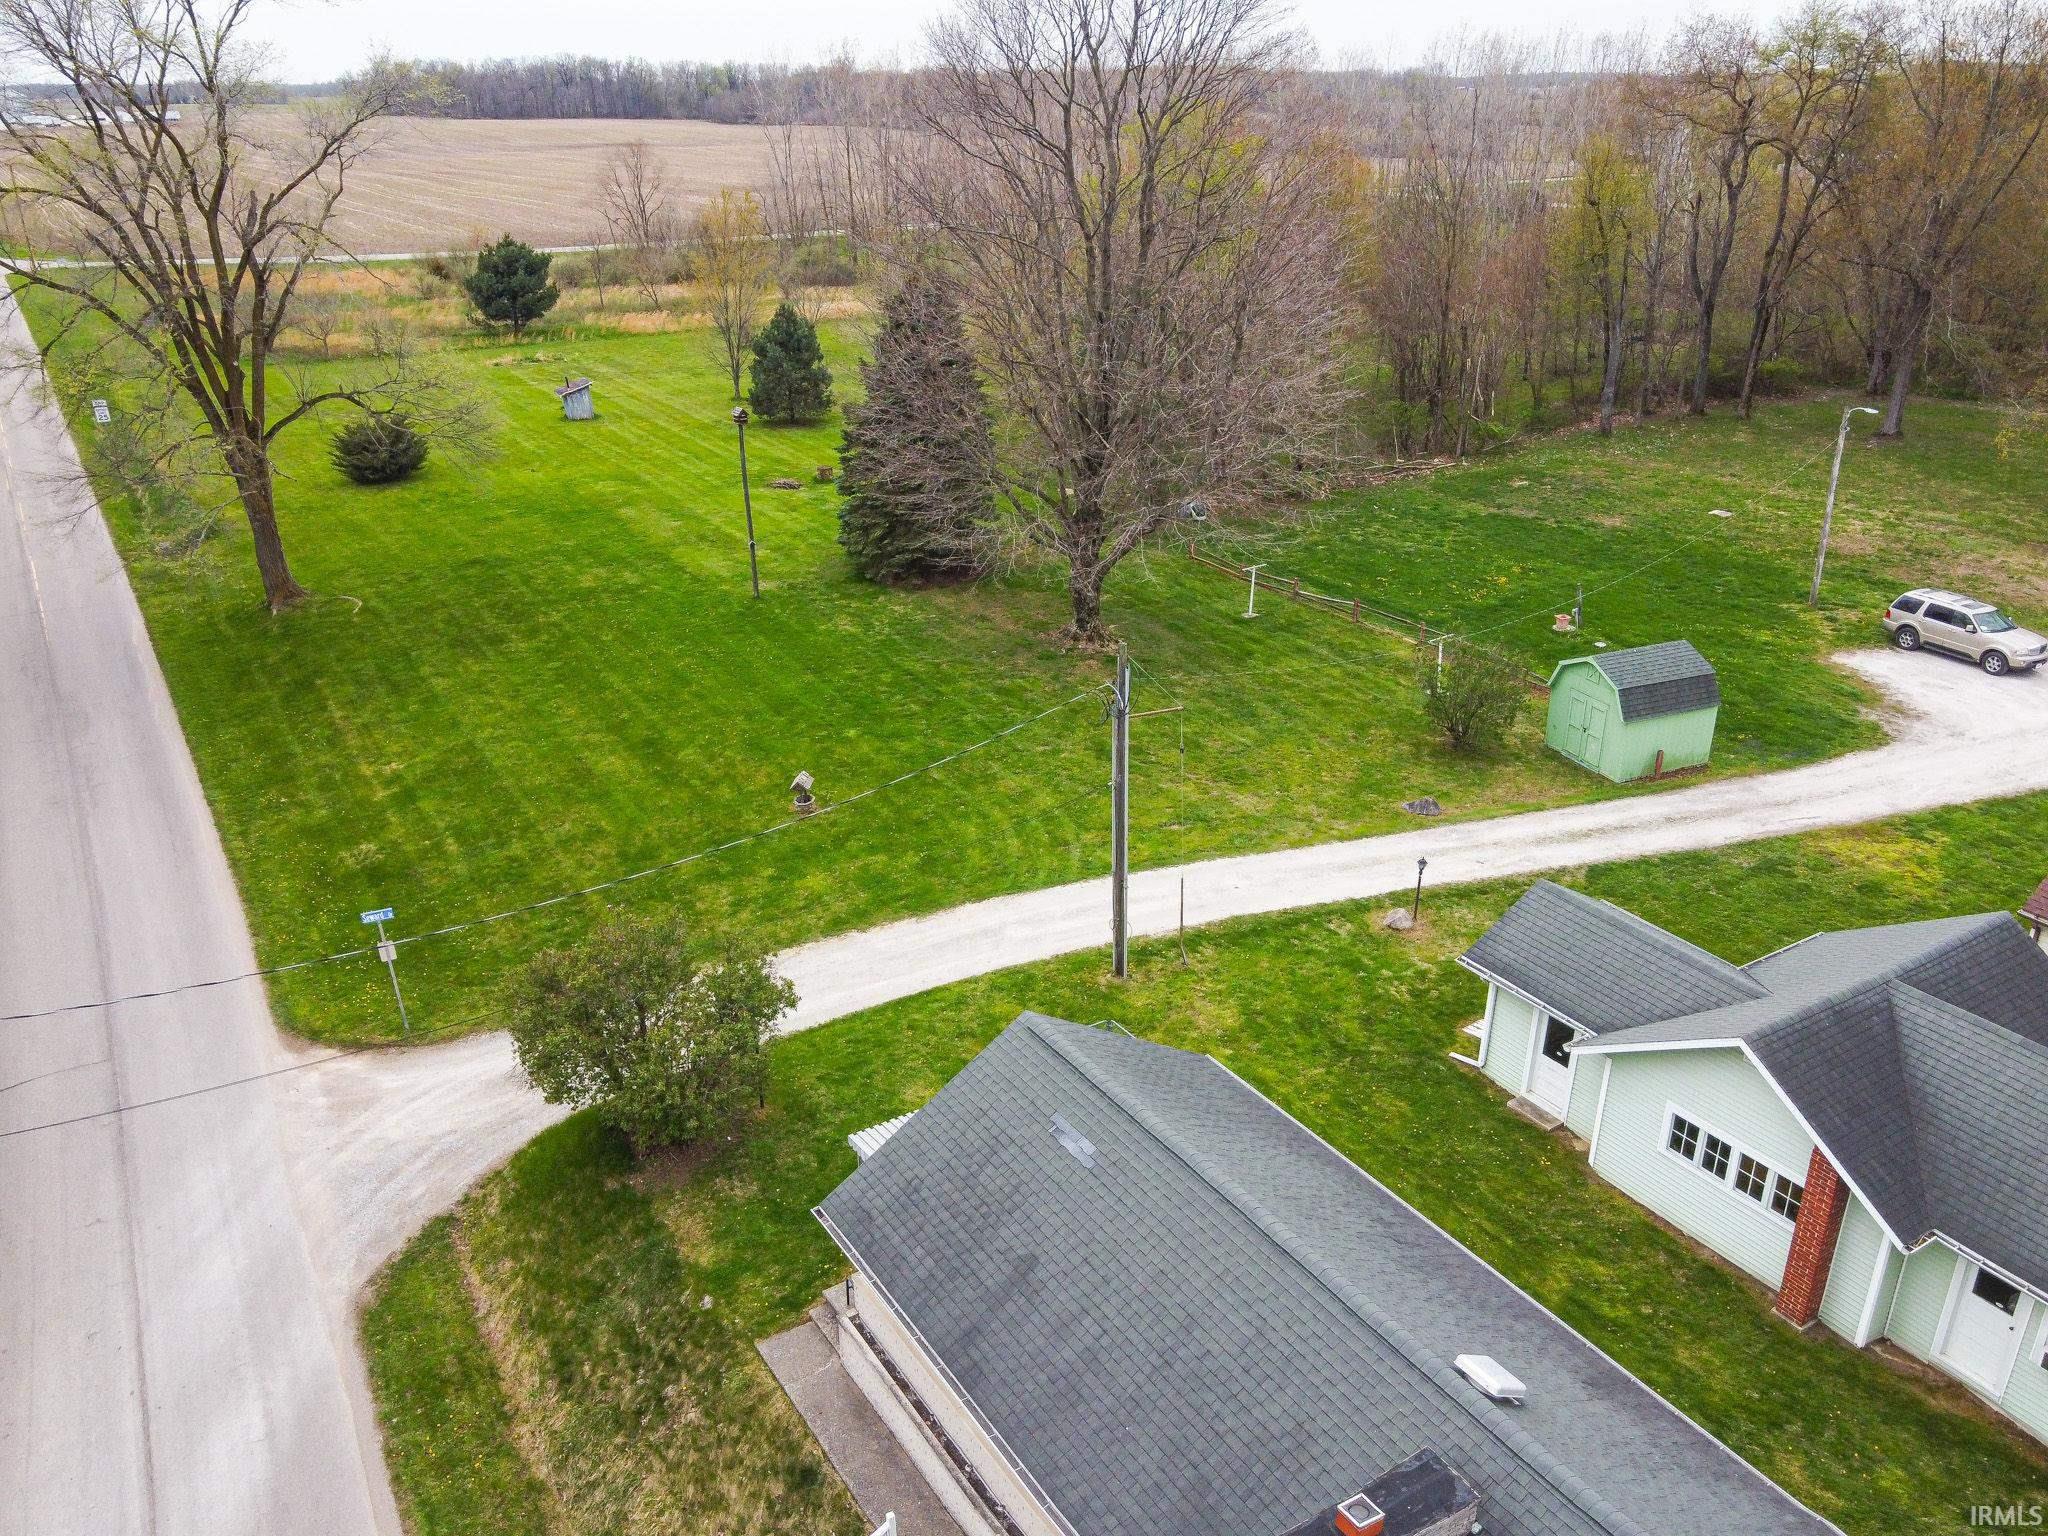 9877 S 750 west county, Claypool, IN 46510